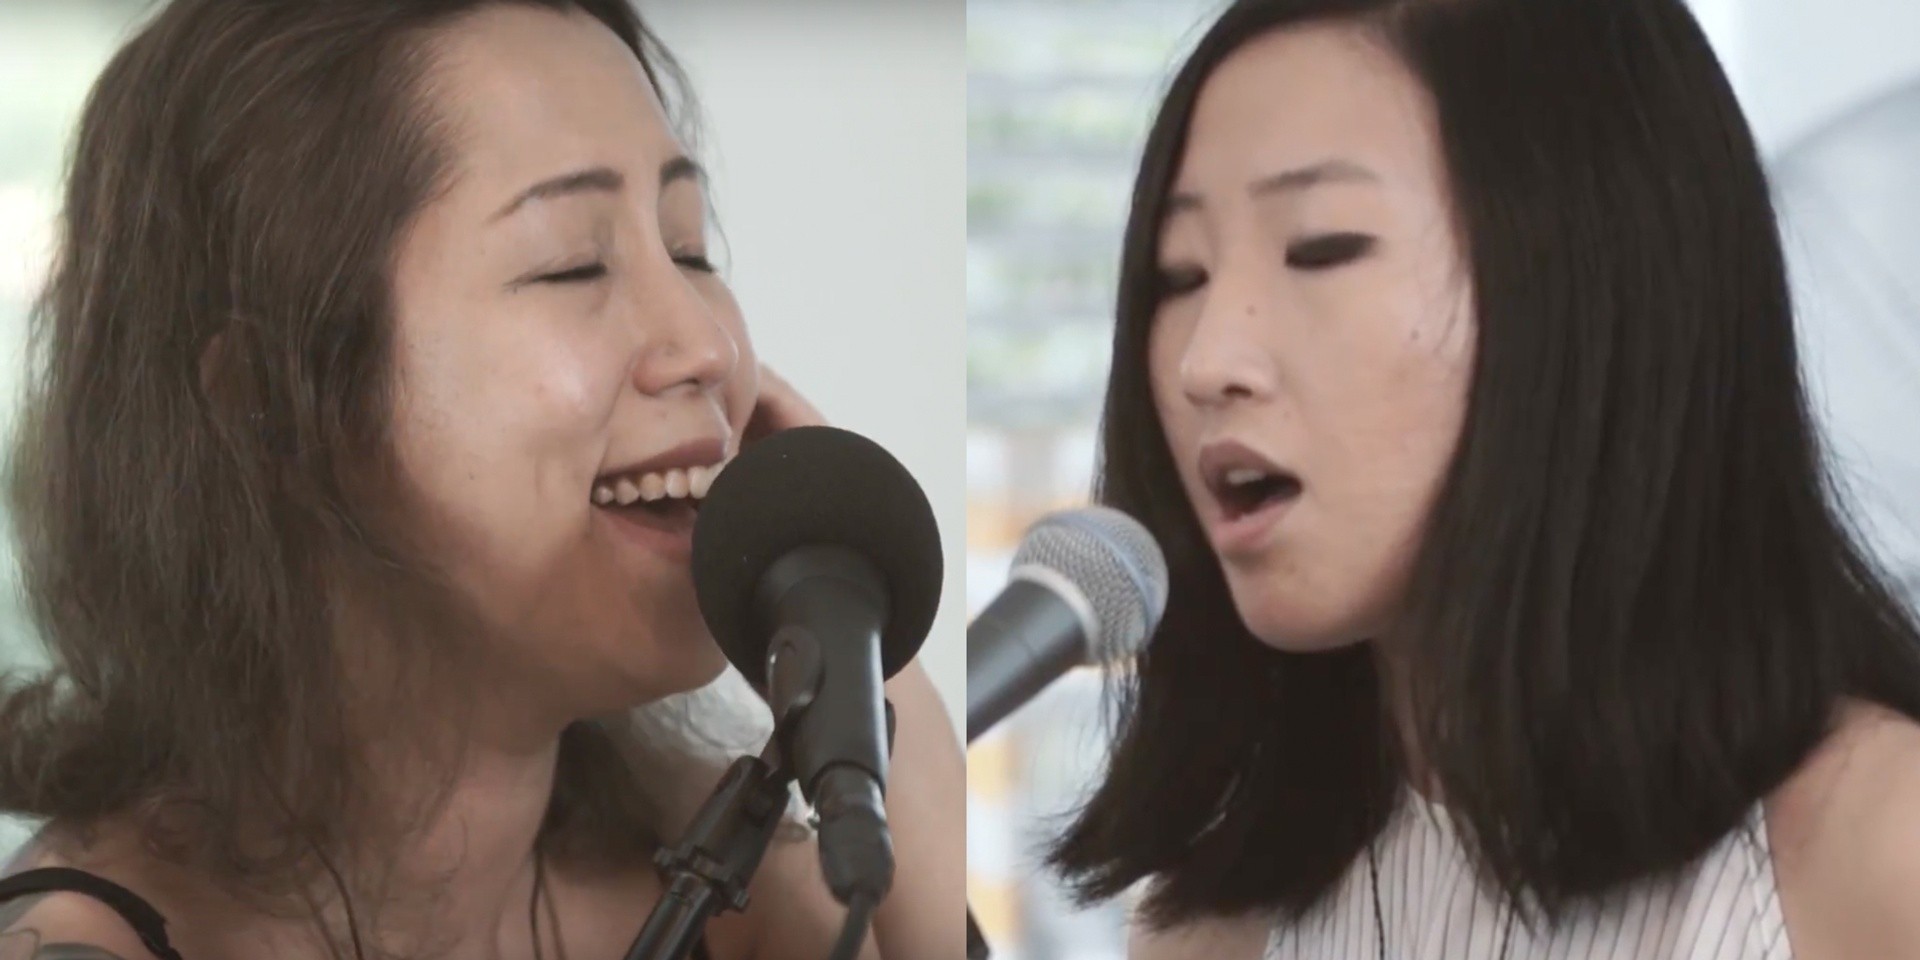 Vandetta and weish join forces for cover of Radiohead's 'Just' – watch